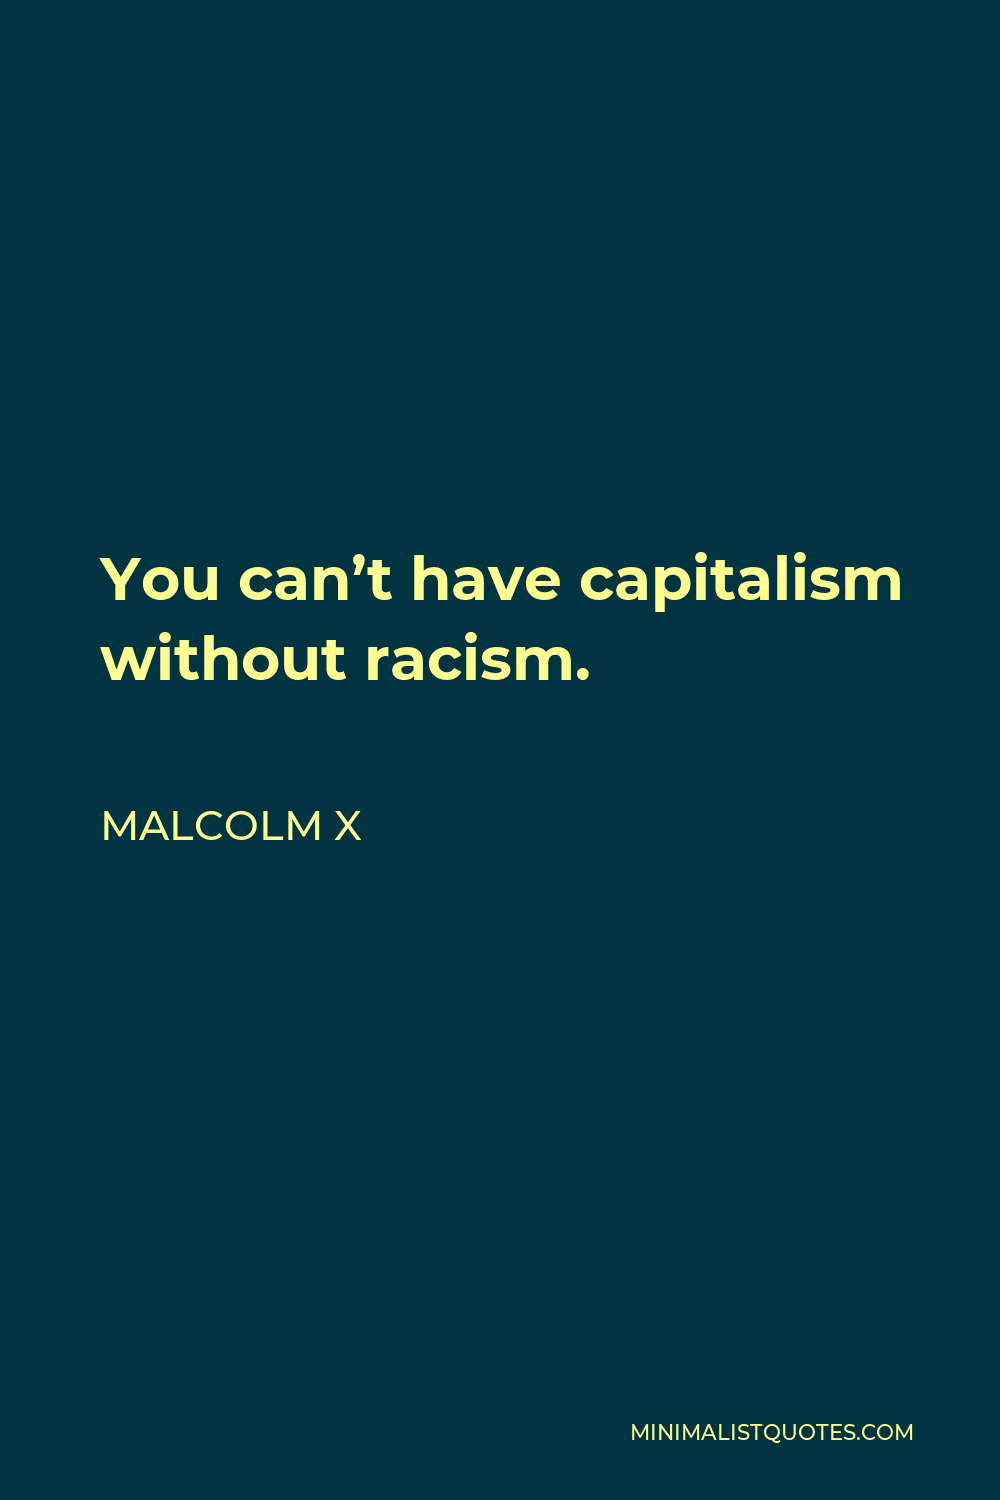 Malcolm X Quote - You can’t have capitalism without racism.